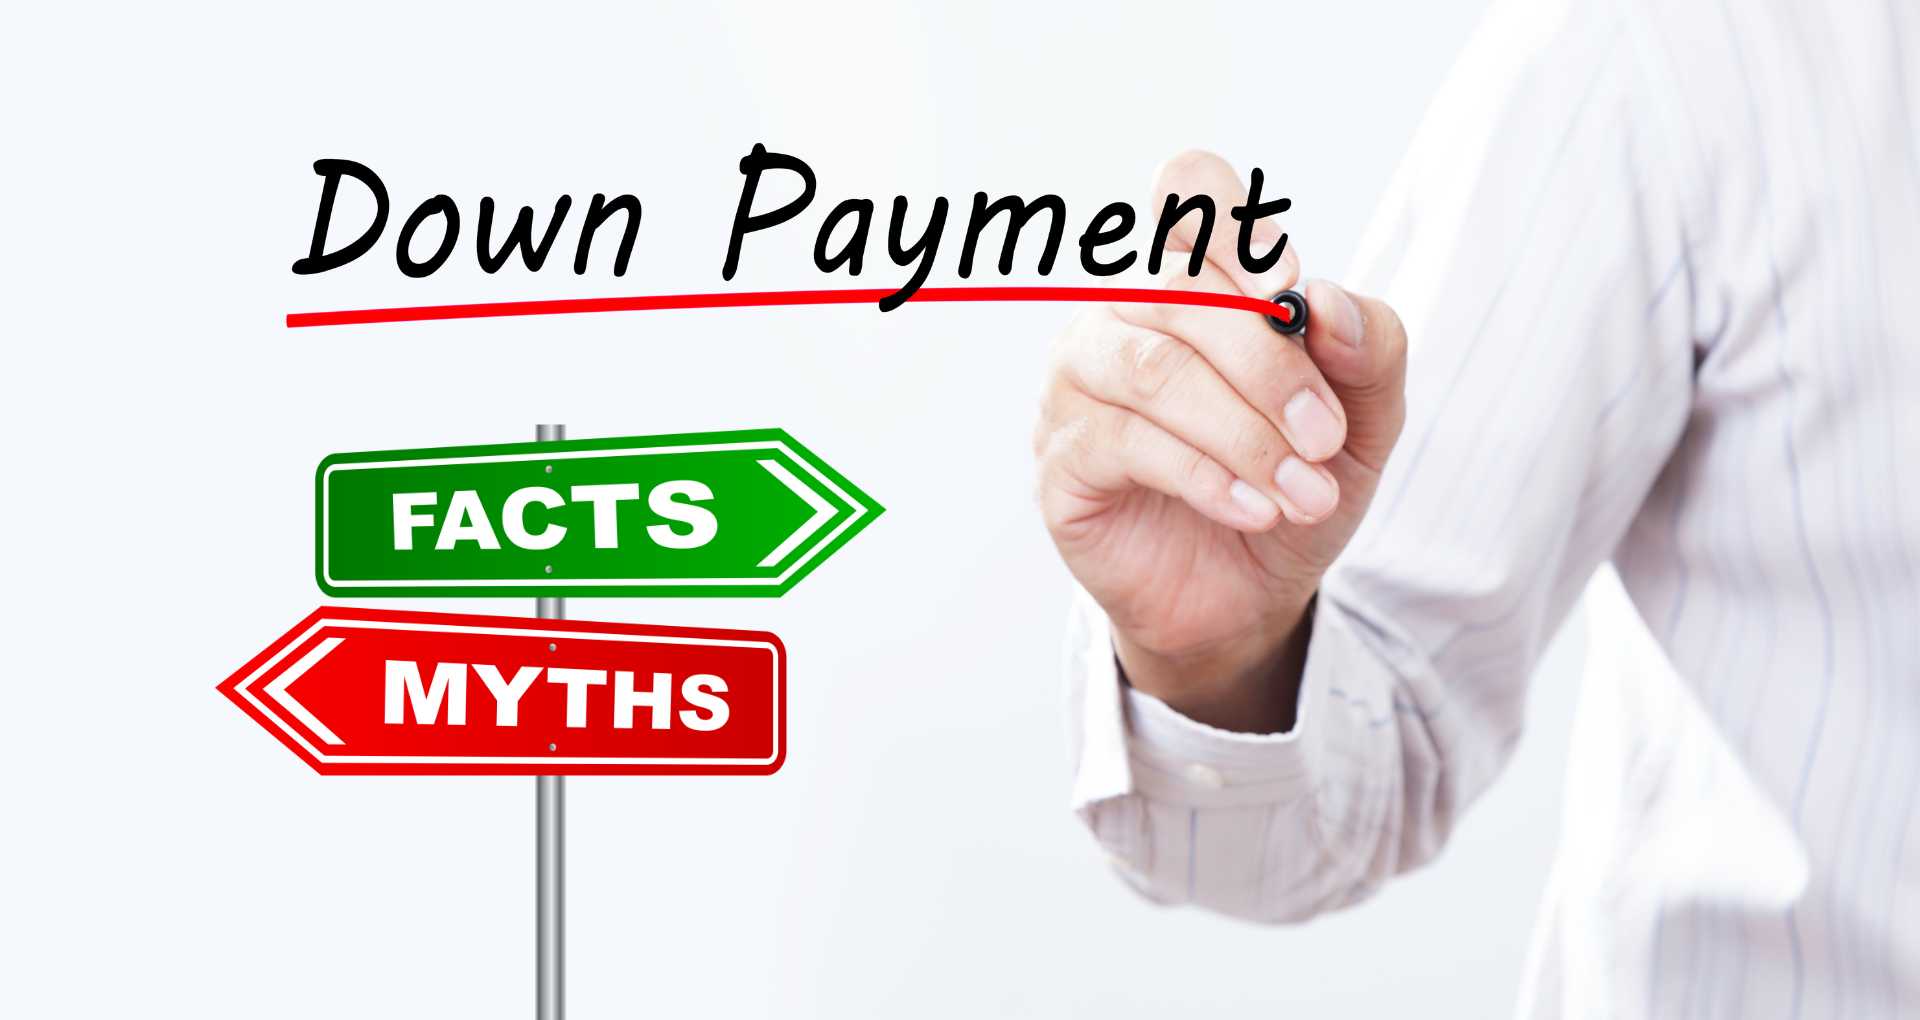 Down Payments In Canada - How Much Do You Really Need